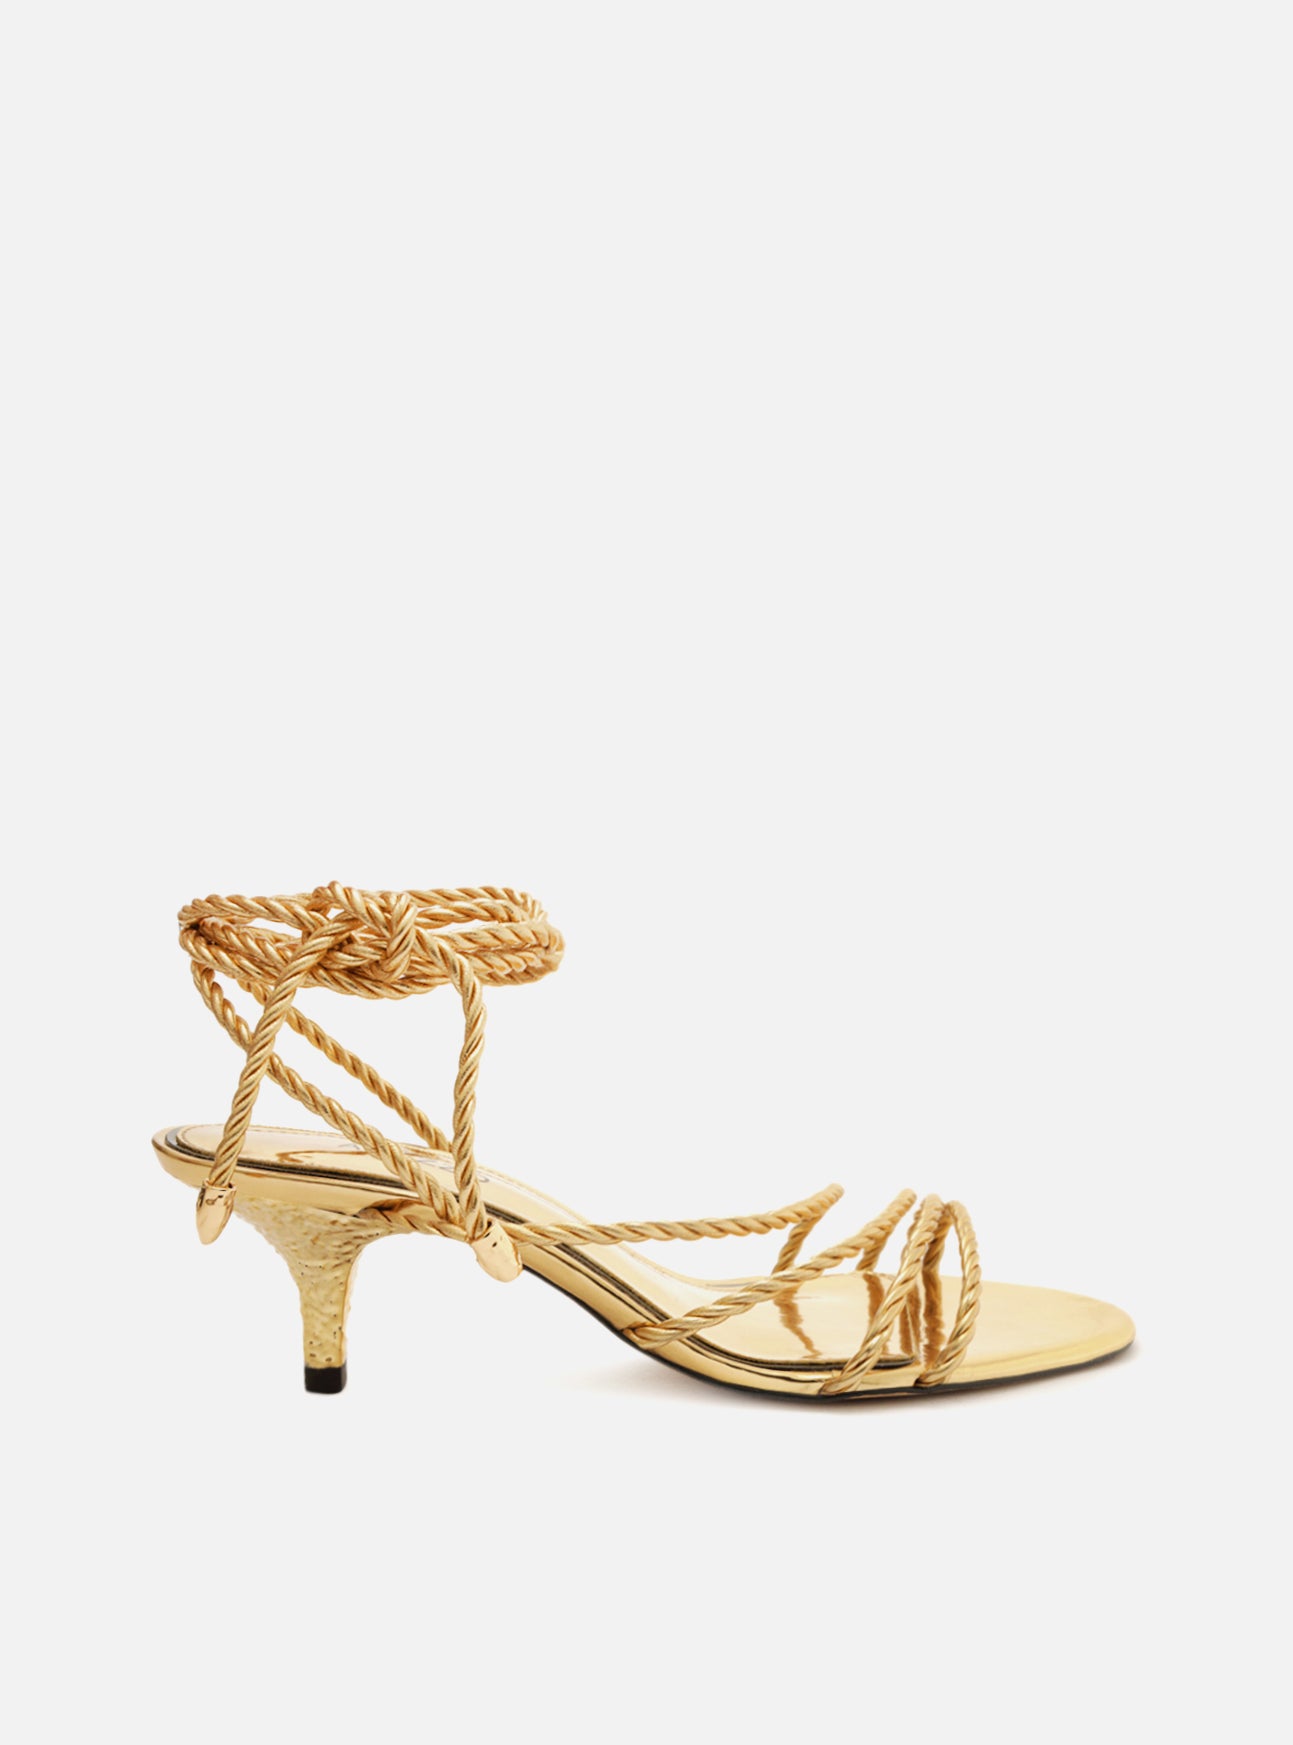 Golden leather sandal, complete with twisted straps, low stiletto heel in hammered gold metal and round toe.